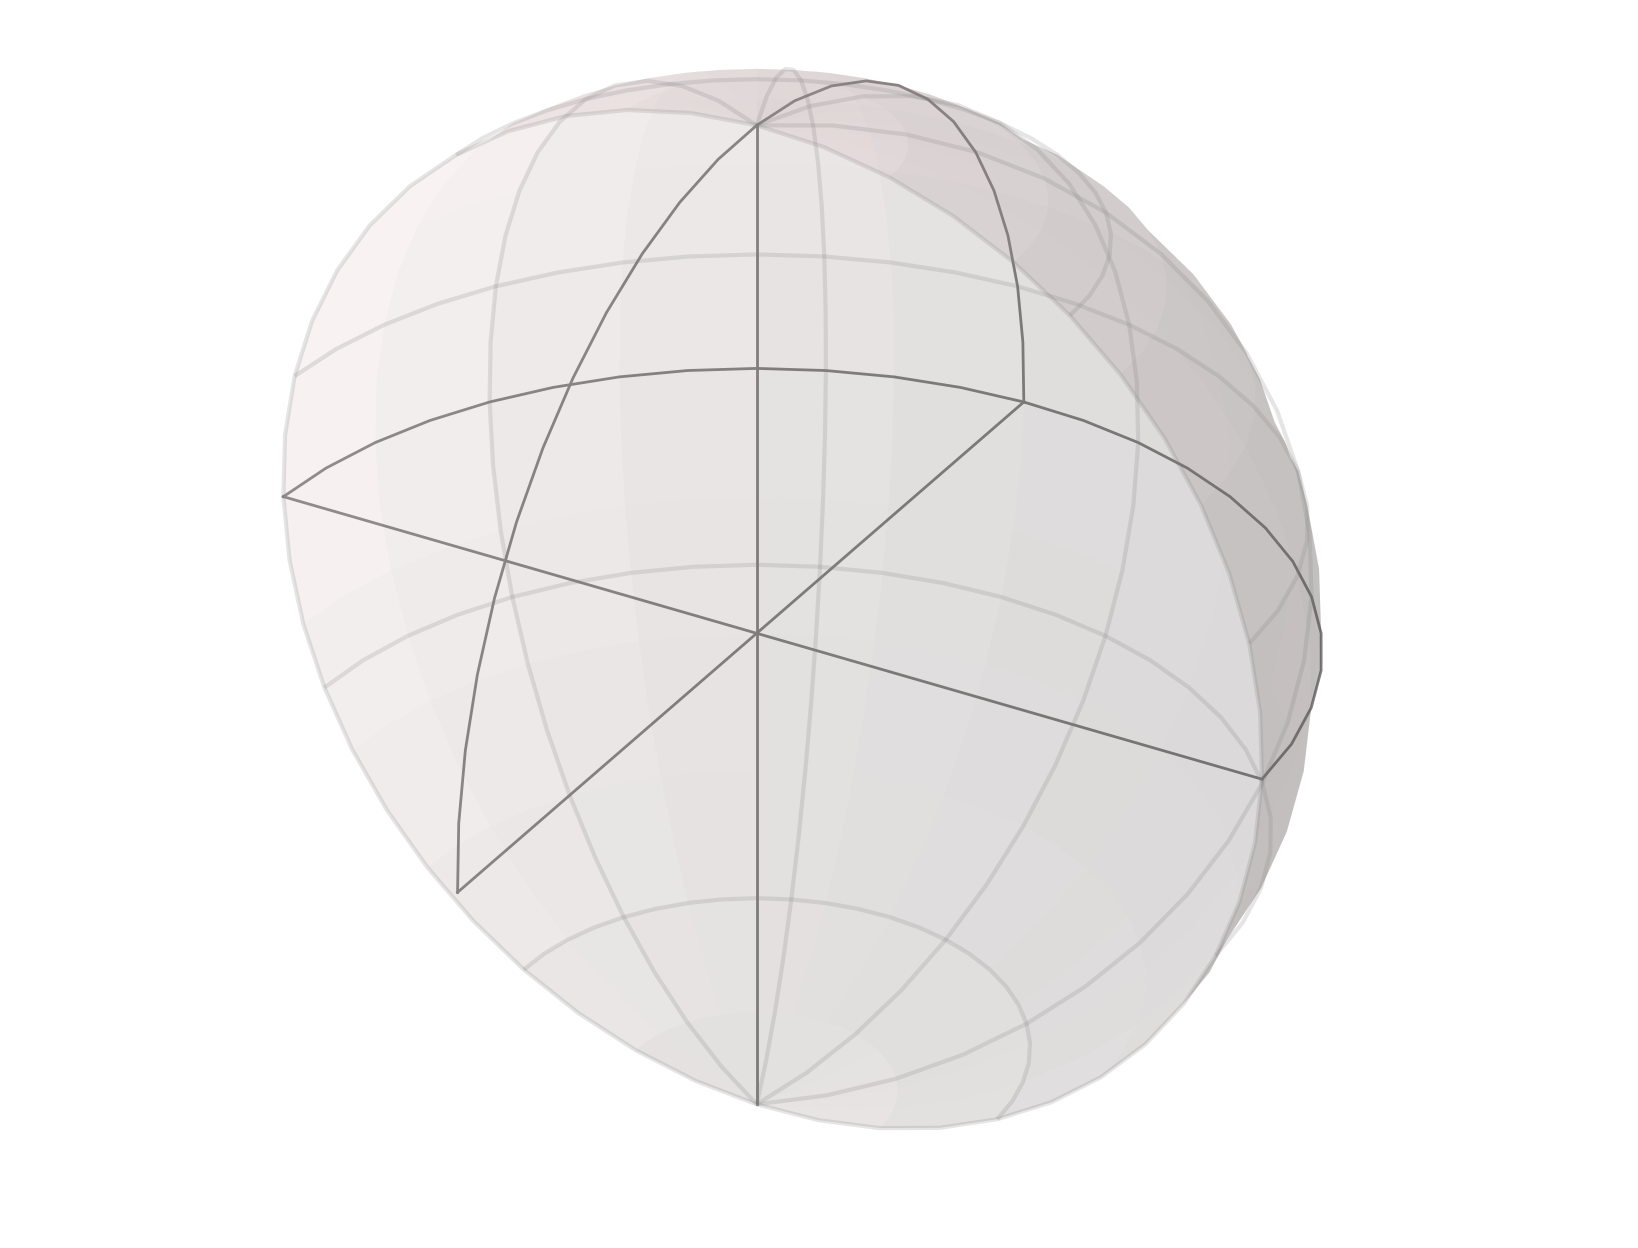 Qubit Superposition on a Bloch sphere: This visualization, created with IBM's Qiskit quantum computing software, displays a single qubit in a superposition state. A qubit, or quantum bit, is the basic unit of quantum information. In this case, the qubit is in a state of superposition, meaning it exists in a combination of both '0' and '1' states simultaneously, a unique property of quantum mechanics. mputing to visualize the state of a single qubit. 